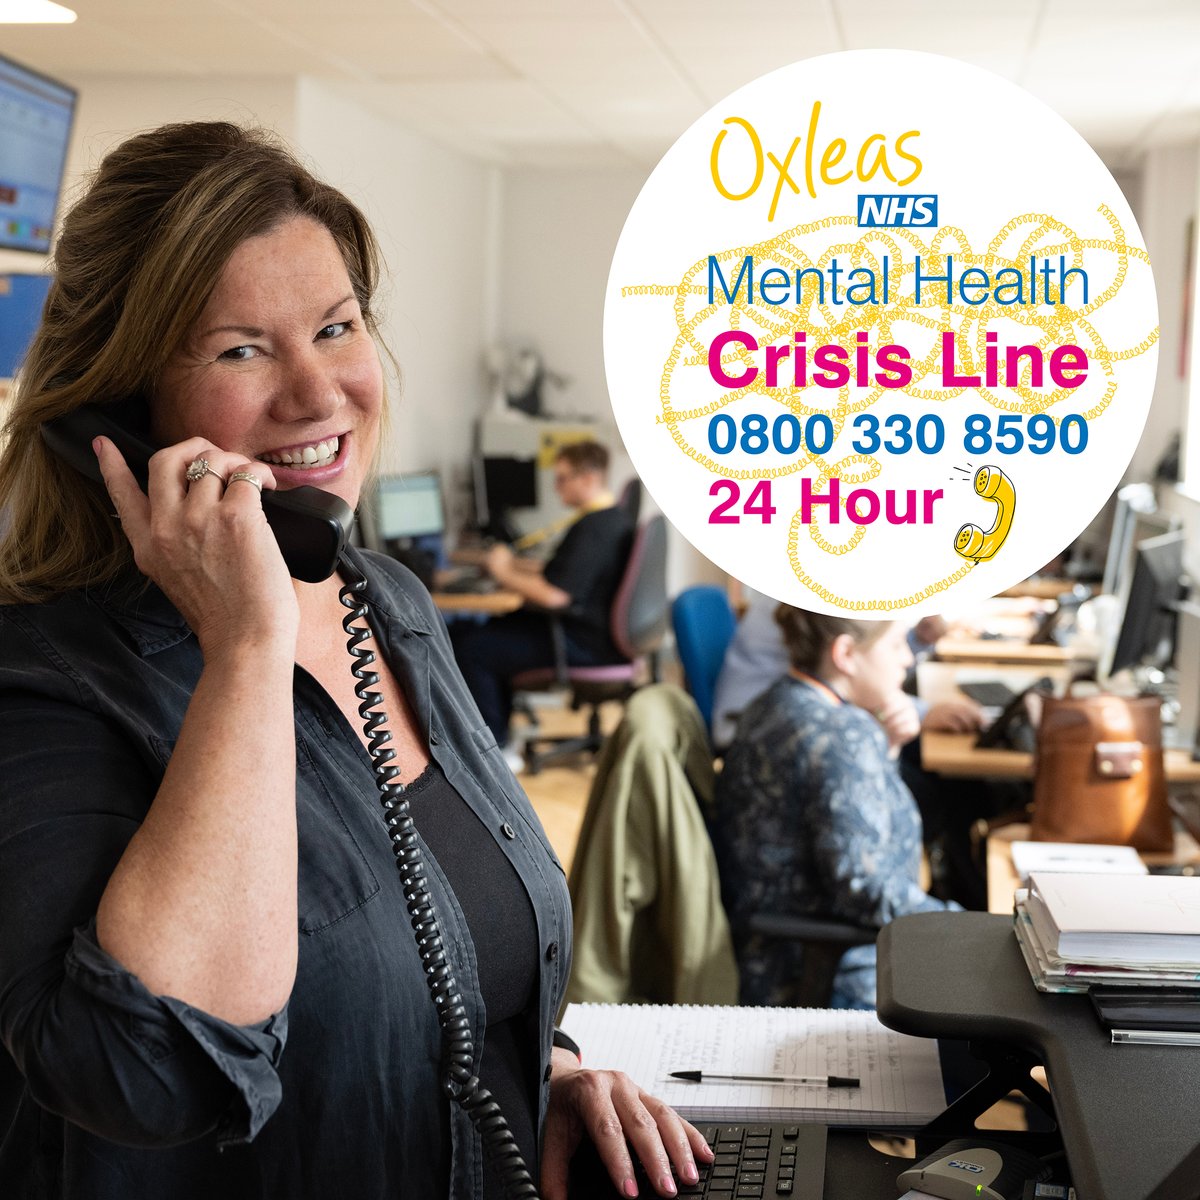 If you need mental health support this weekend, please call our 24 hour telephone line on 0800 330 8590. Our team of professionals are here to help you get the support you need. oxleas.nhs.uk/help-in-a-cris…